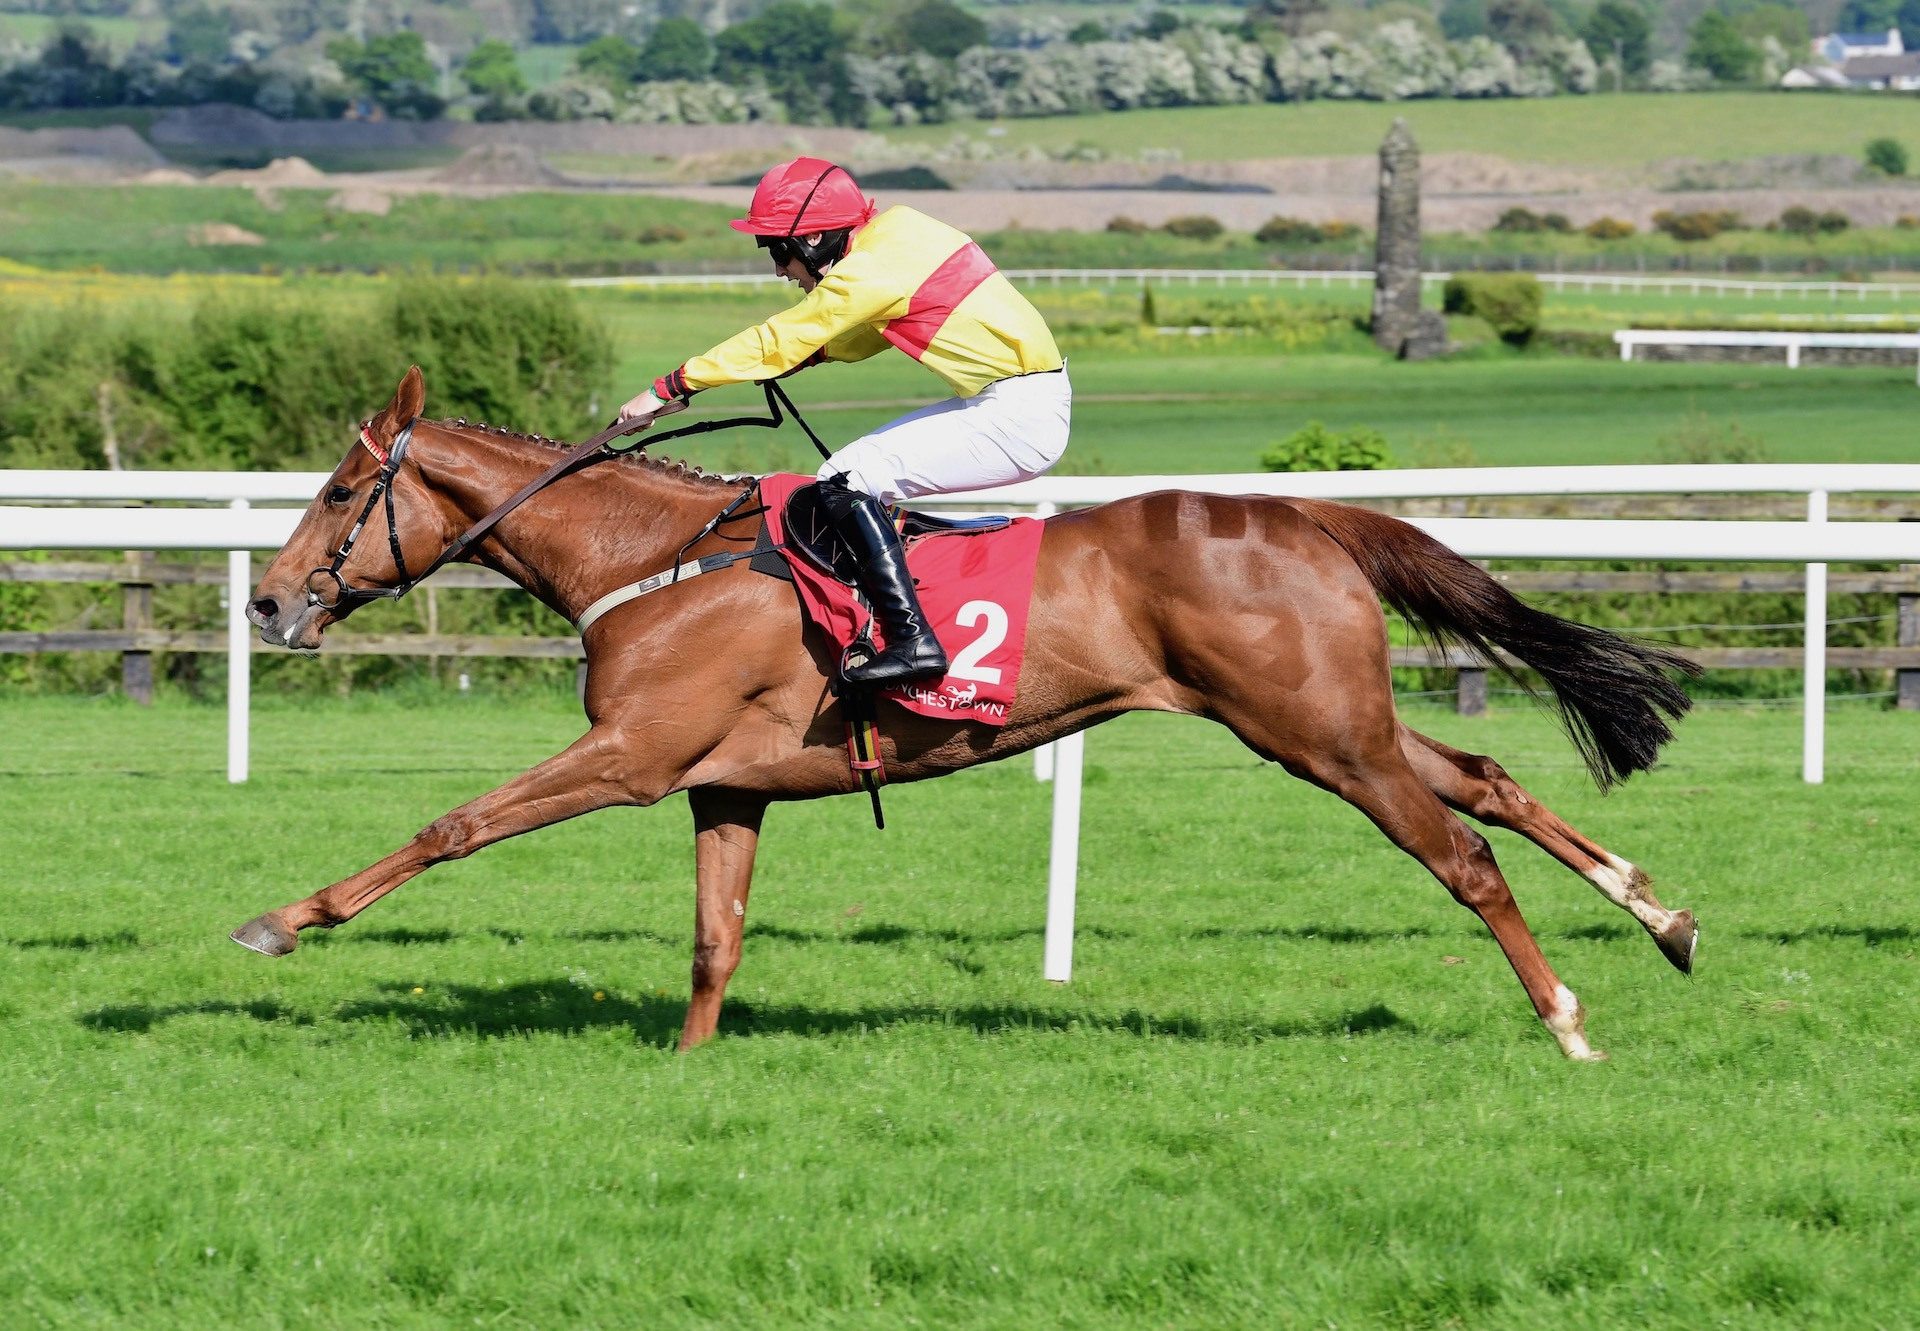 Apple Crumble (Getaway) Wins The Mares Bumper At Punchestown